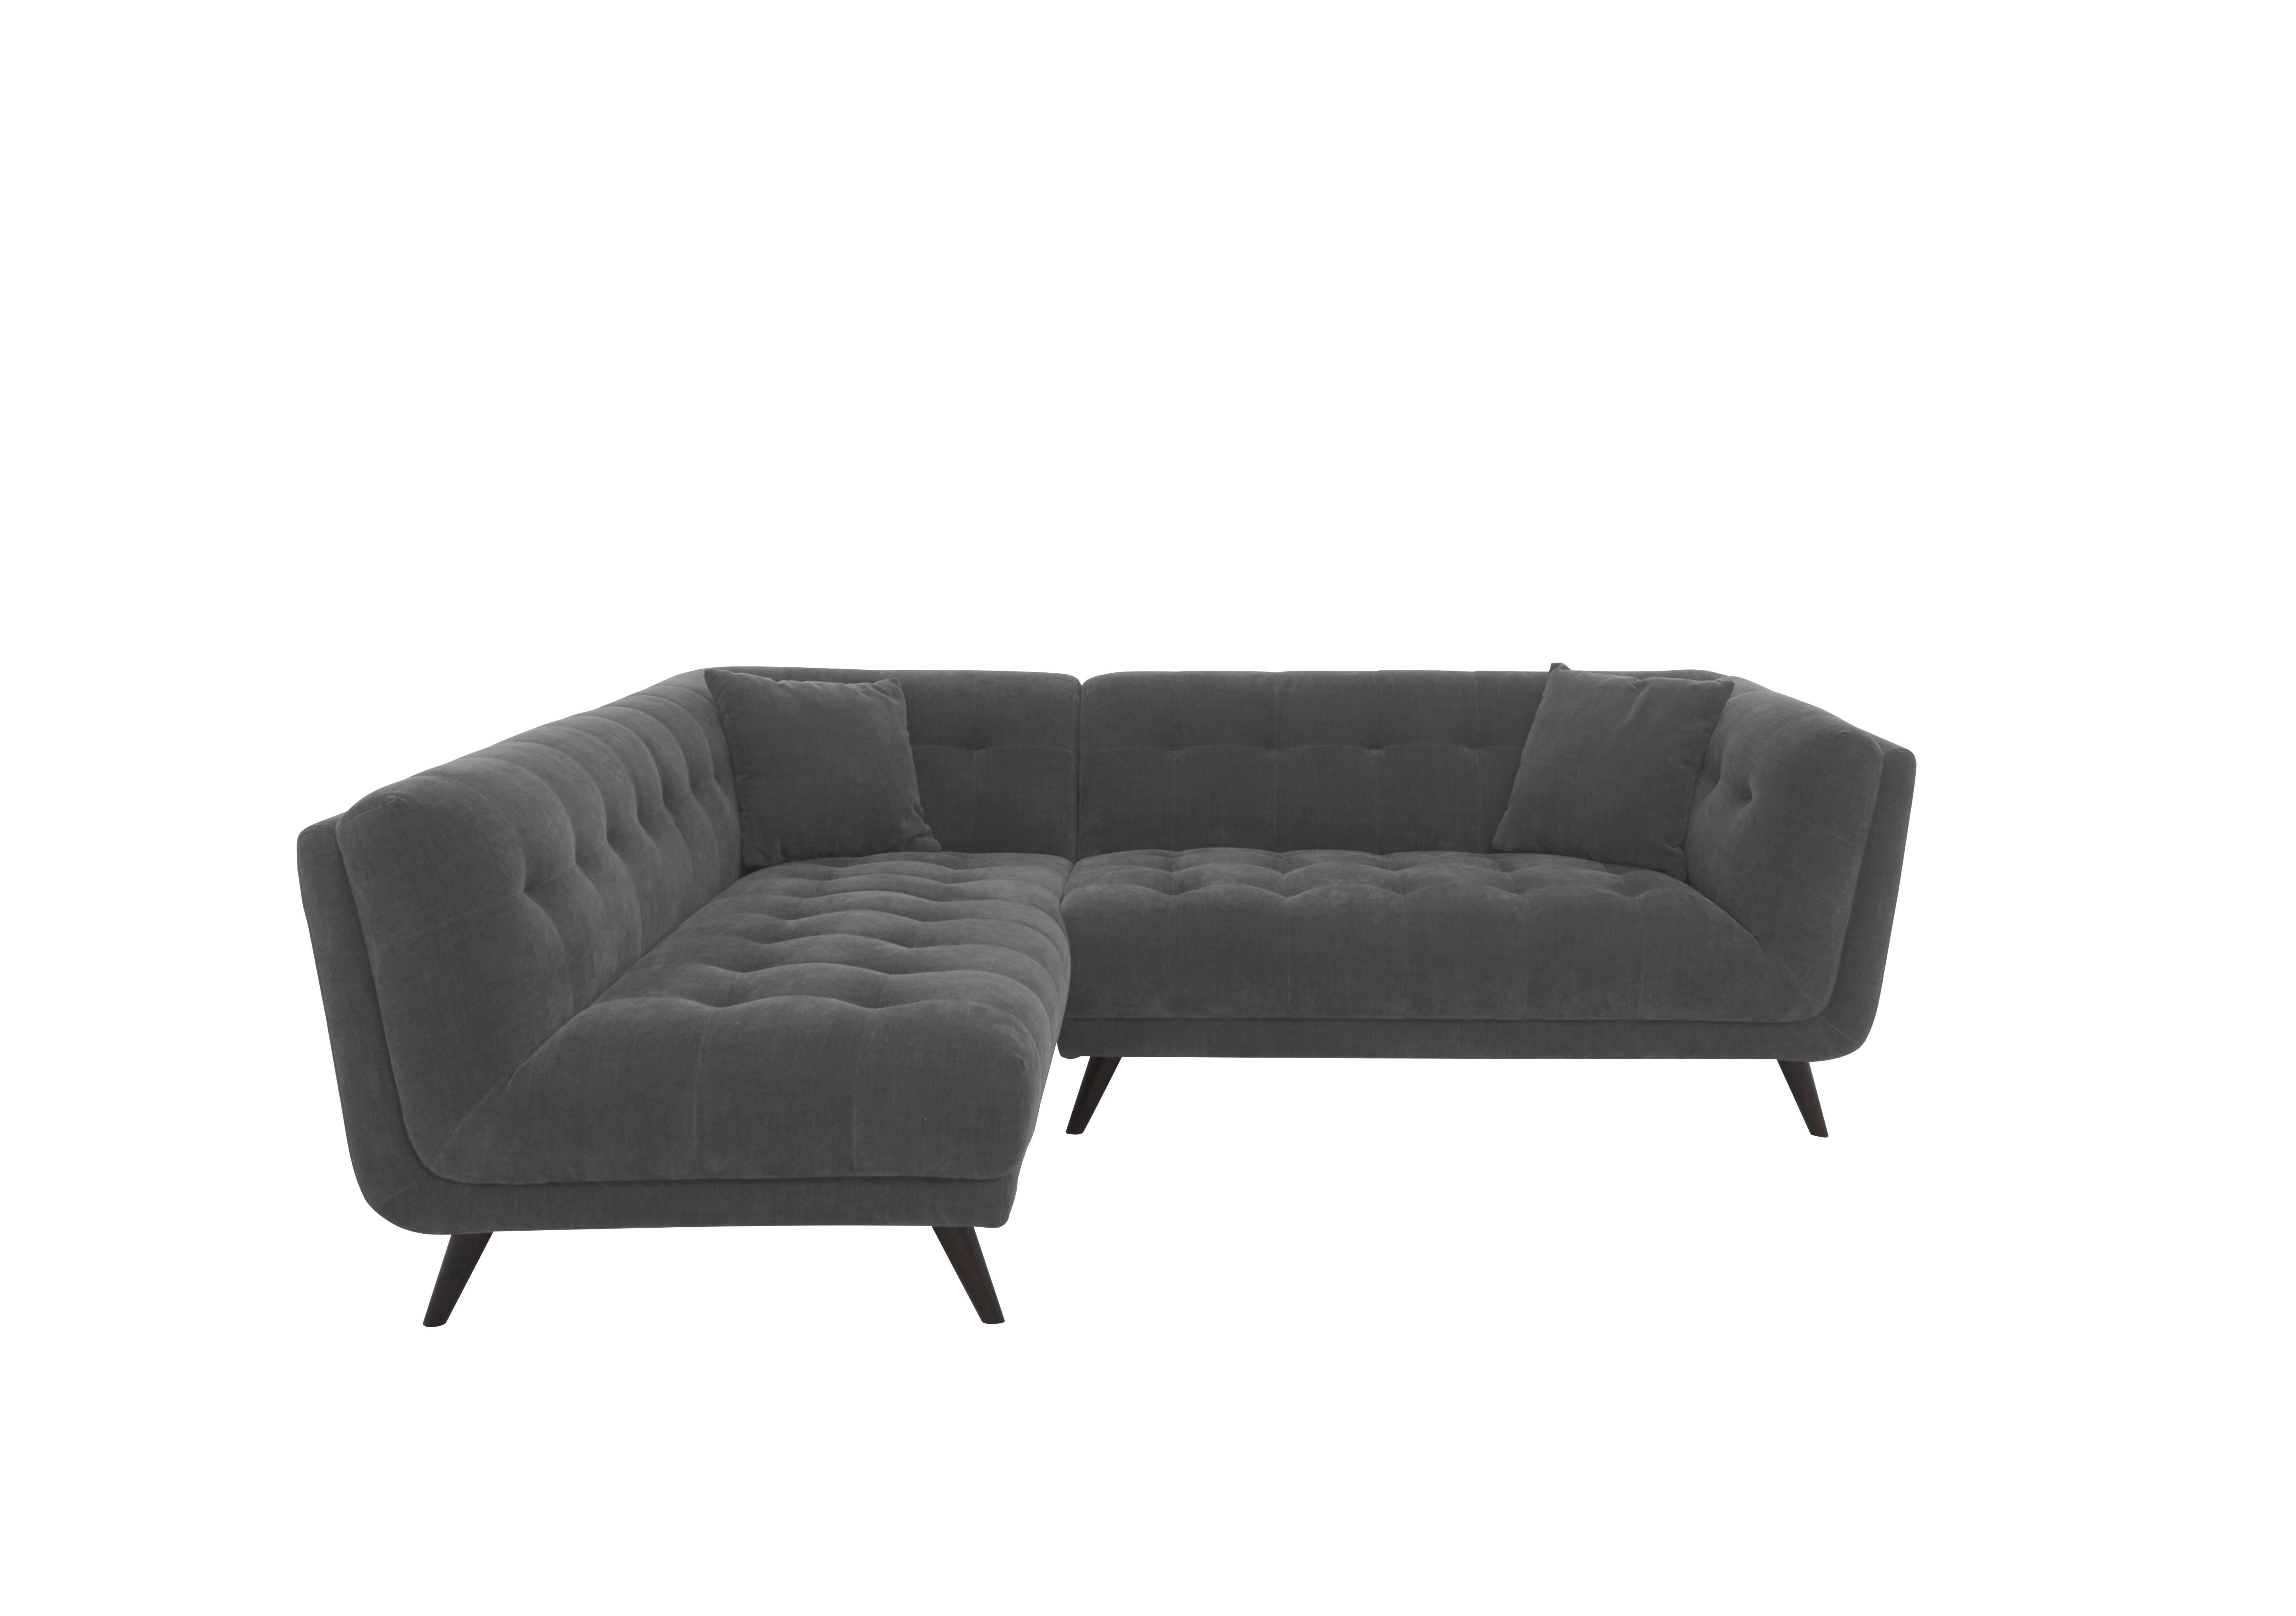 Rene Fabric Chaise End Corner Sofa in Manhattan 58003 Charcoal Es Ft on Furniture Village